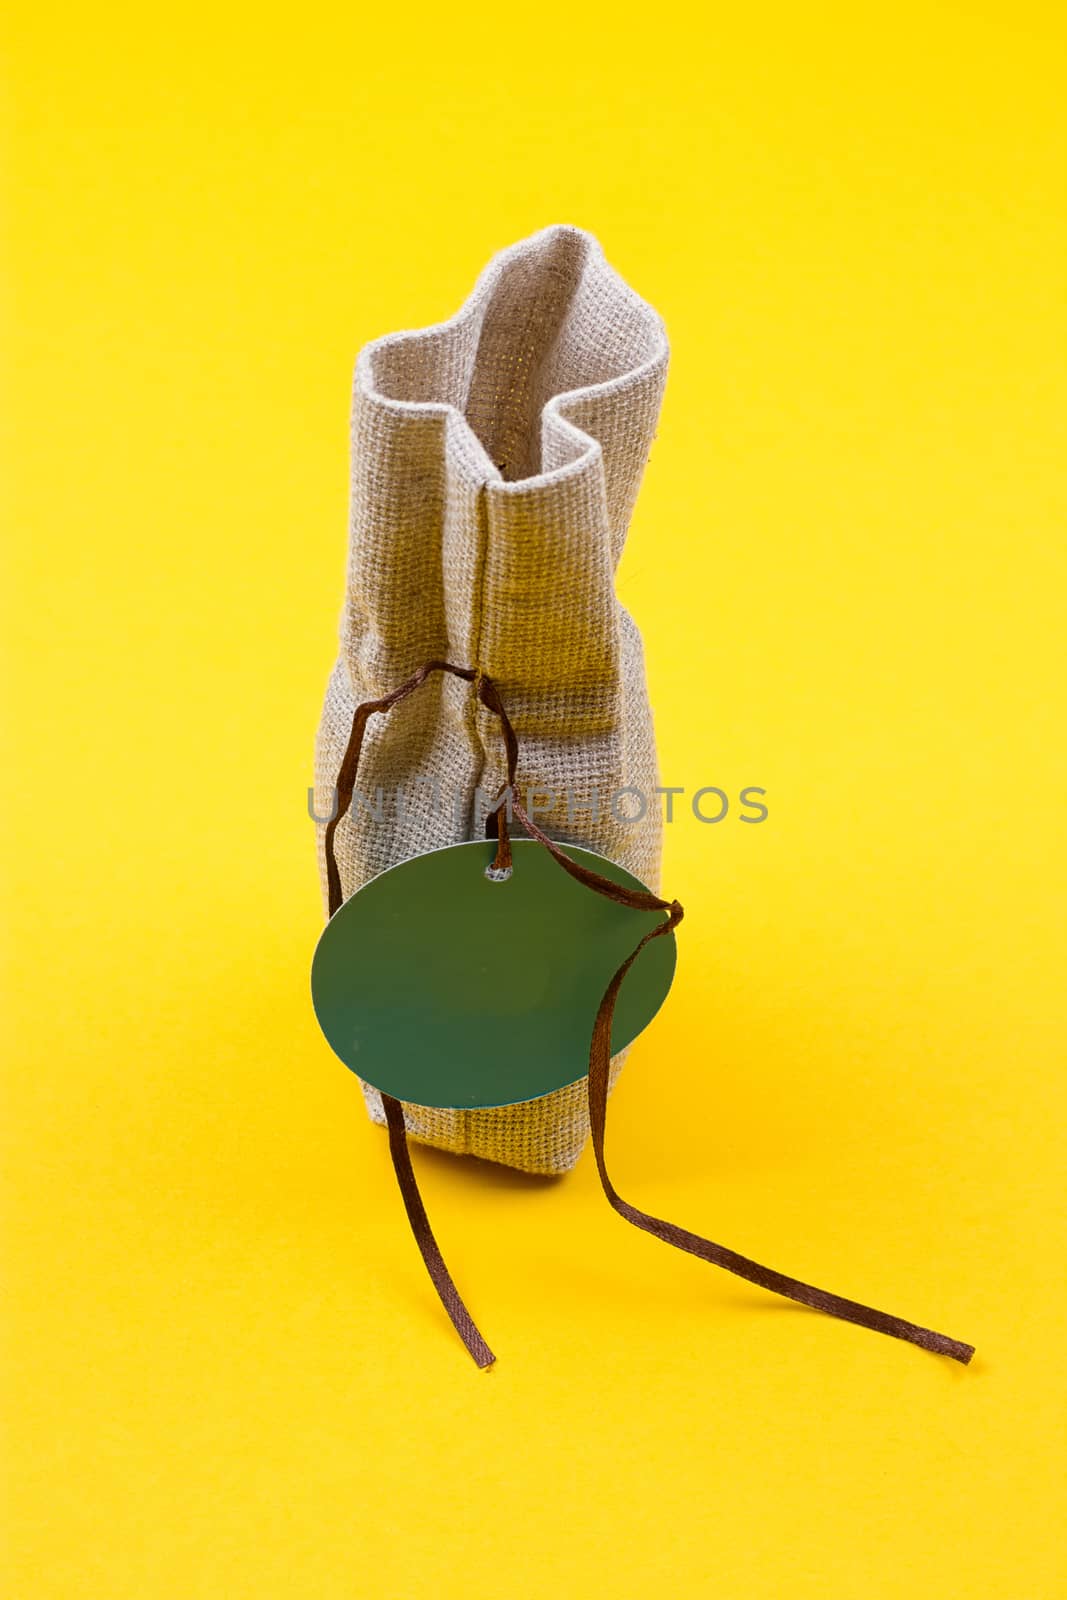 Bag of sackcloth with a blue tag on a yellow background